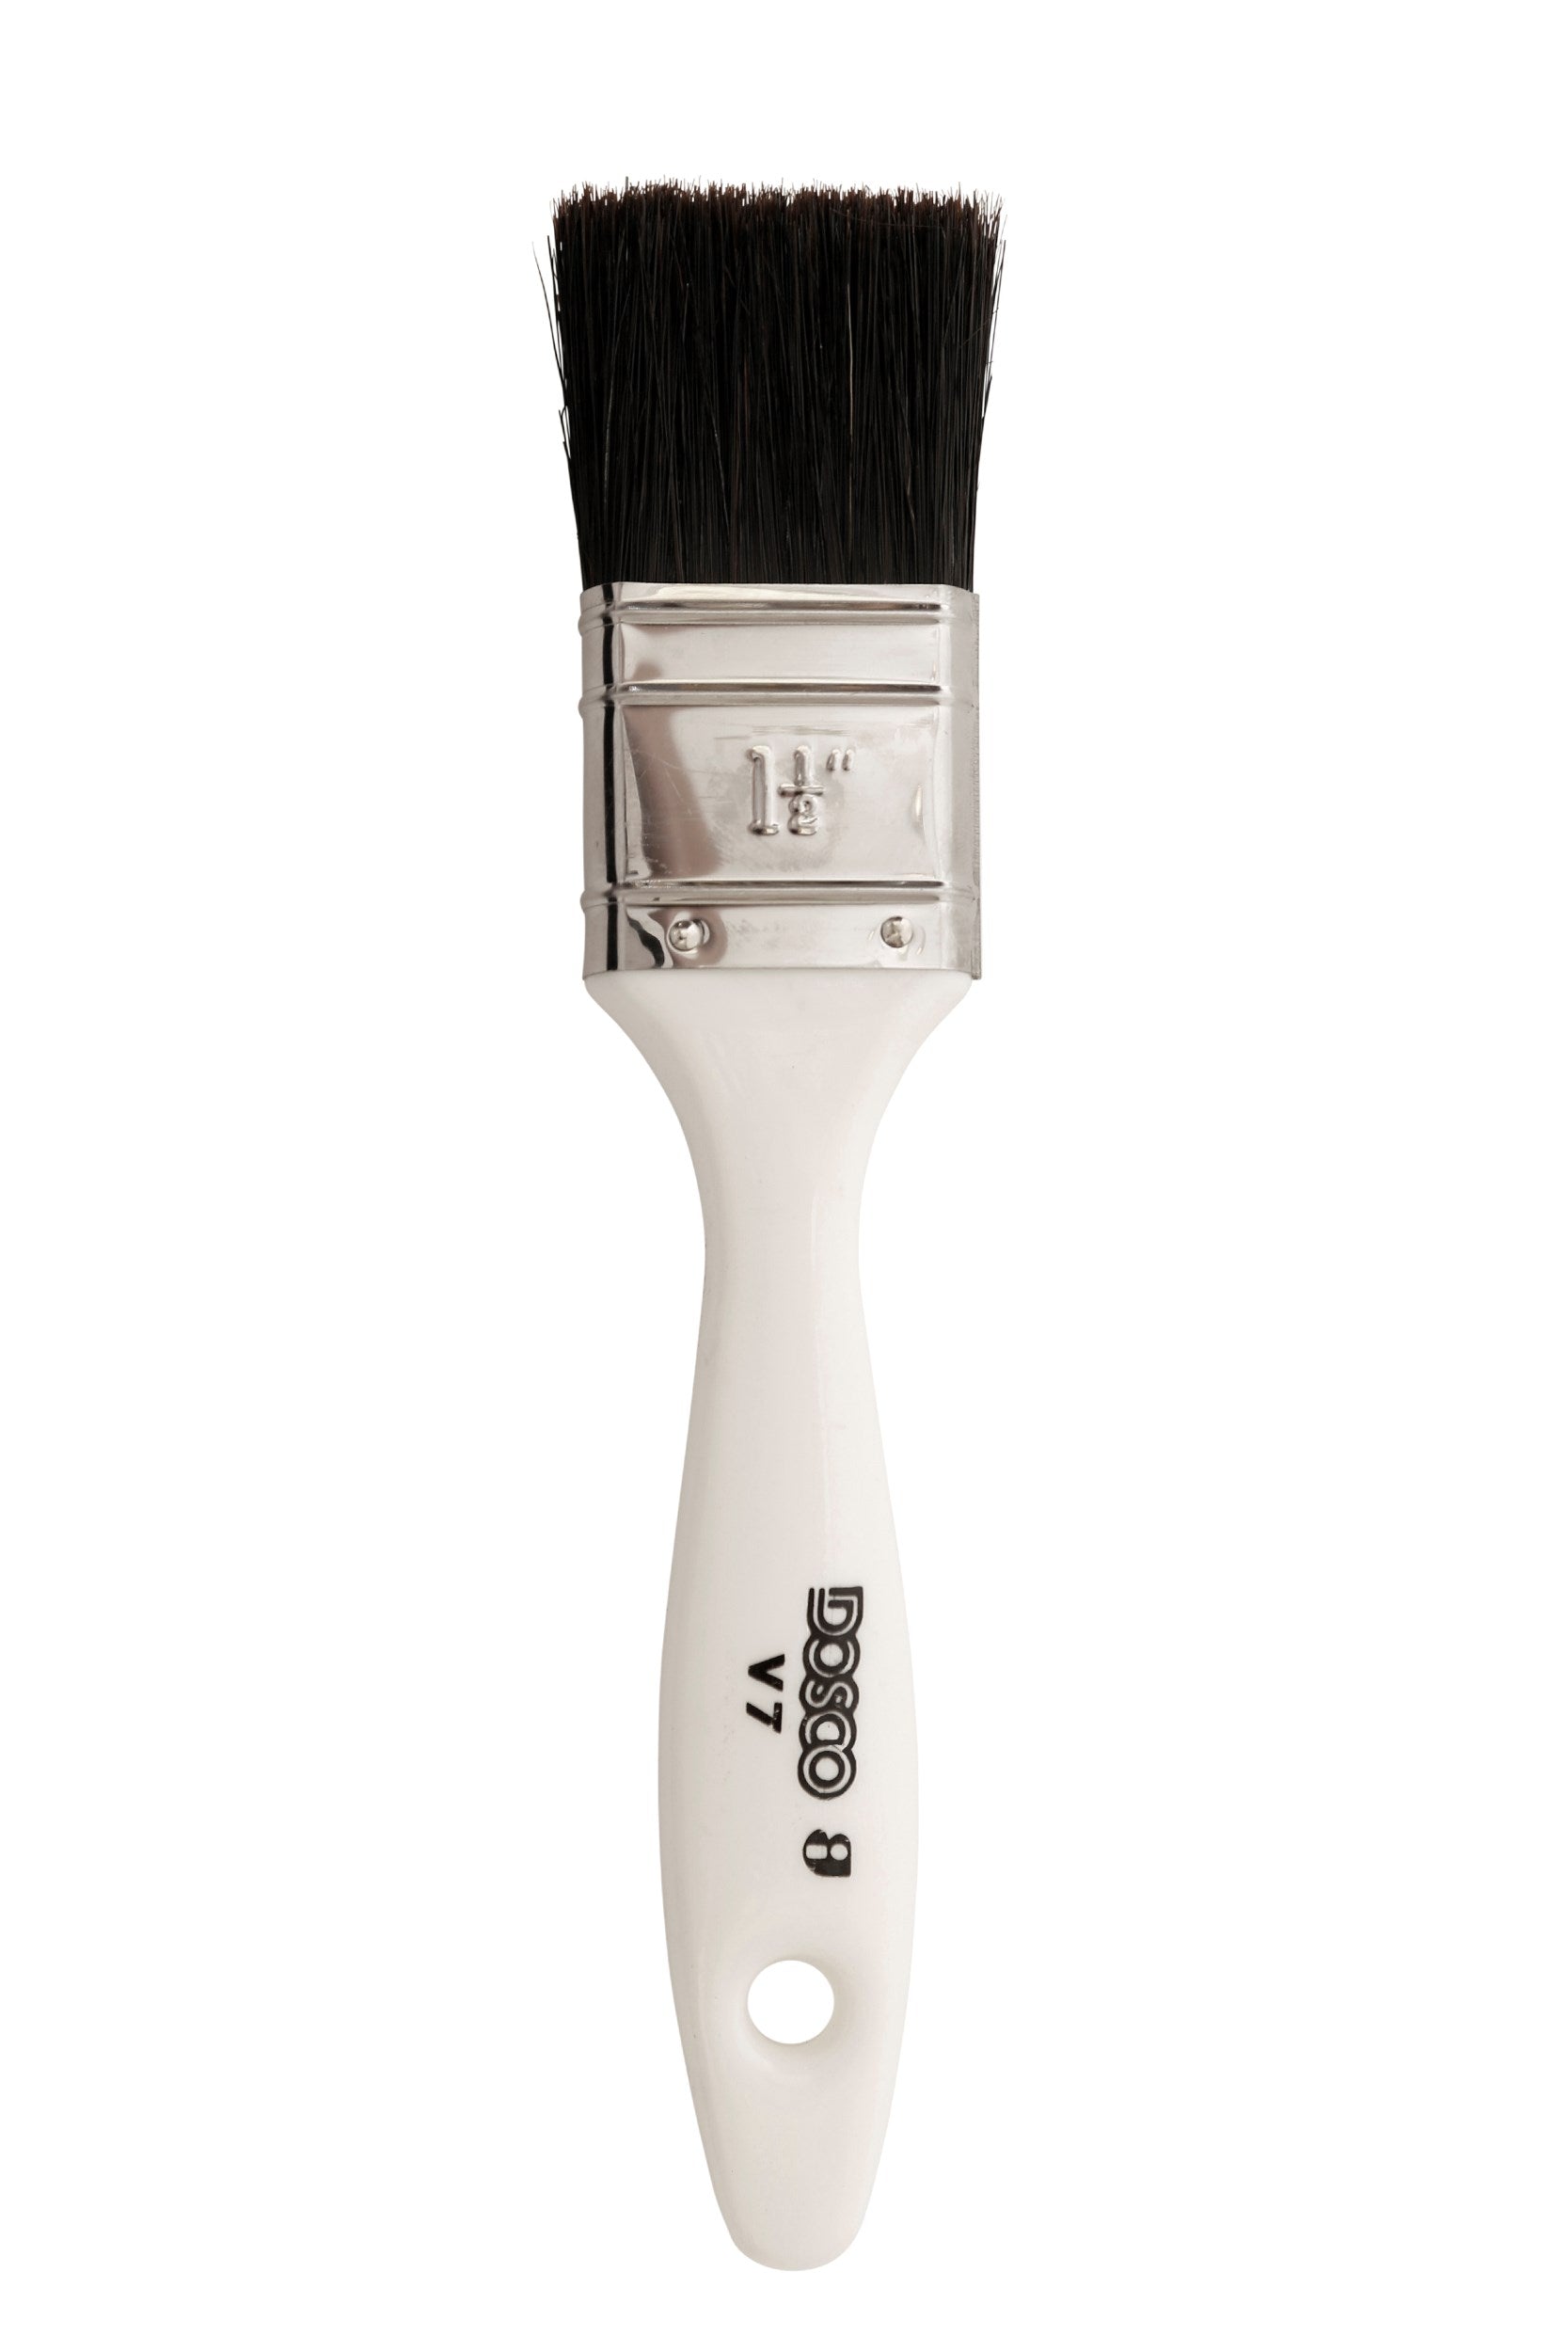 Paint & Decorating | DOSCO All Purpose V7 Paint Brush 0.75 inch by Weirs of Baggot St